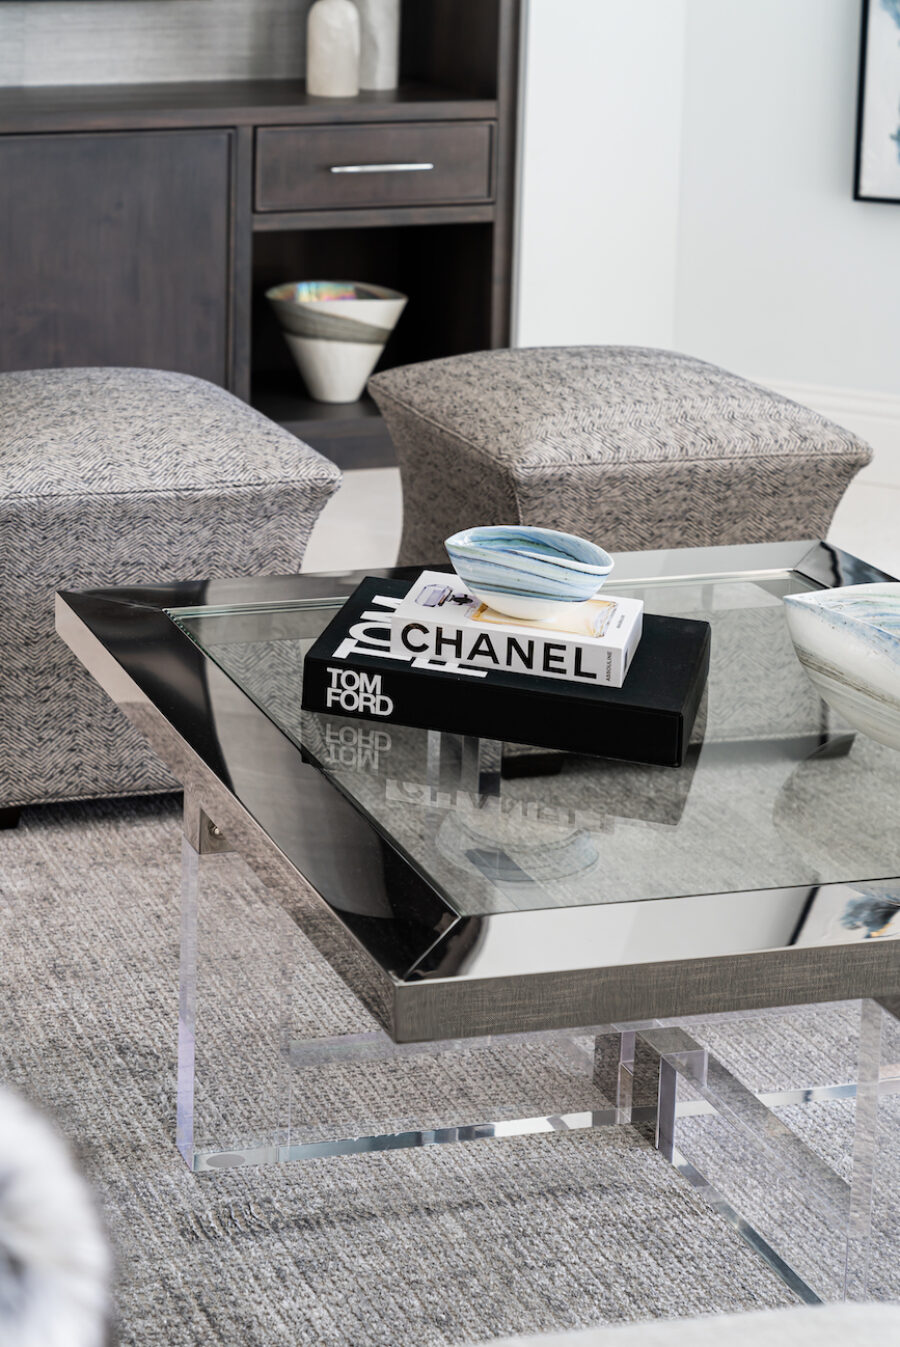 glass-mirror-coffee-table-detail-chanel-tom-ford-books